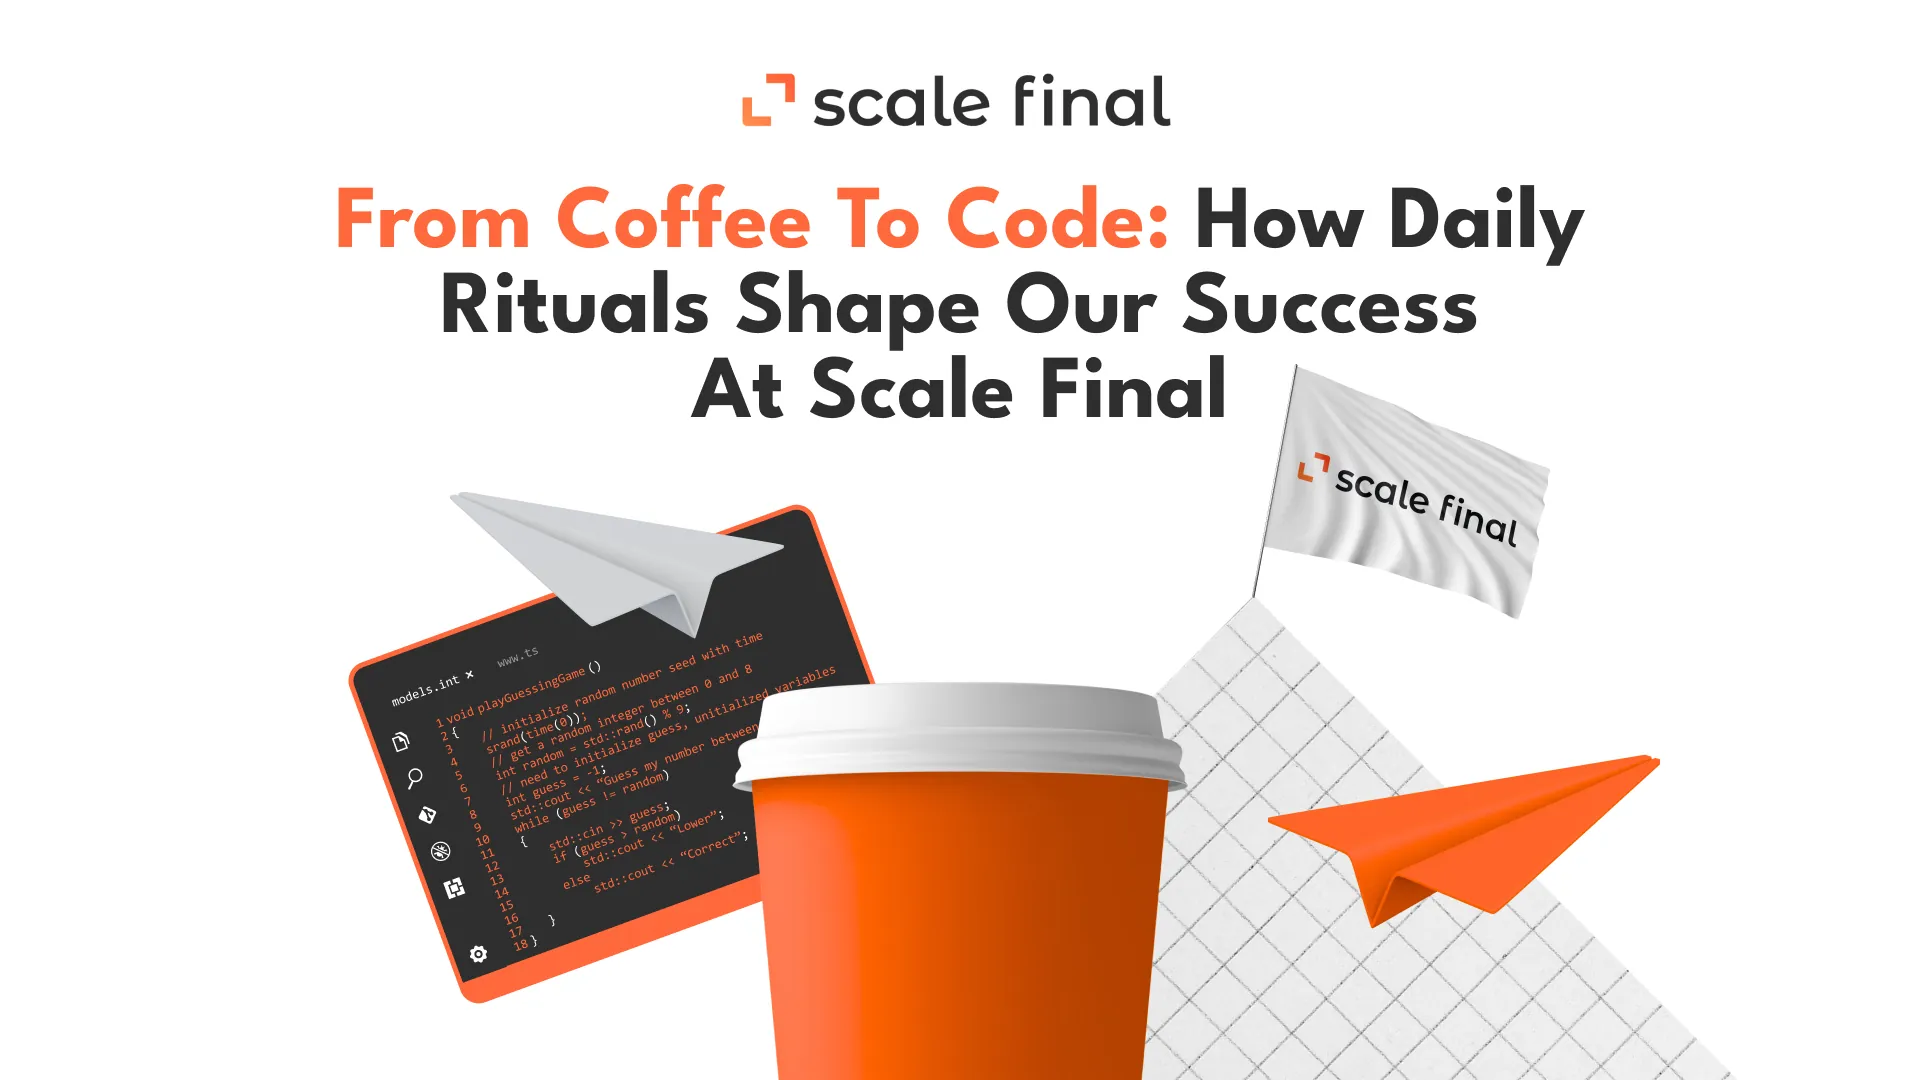 From Coffee to Code: How Daily Rituals Shape Our Success at Scale Final